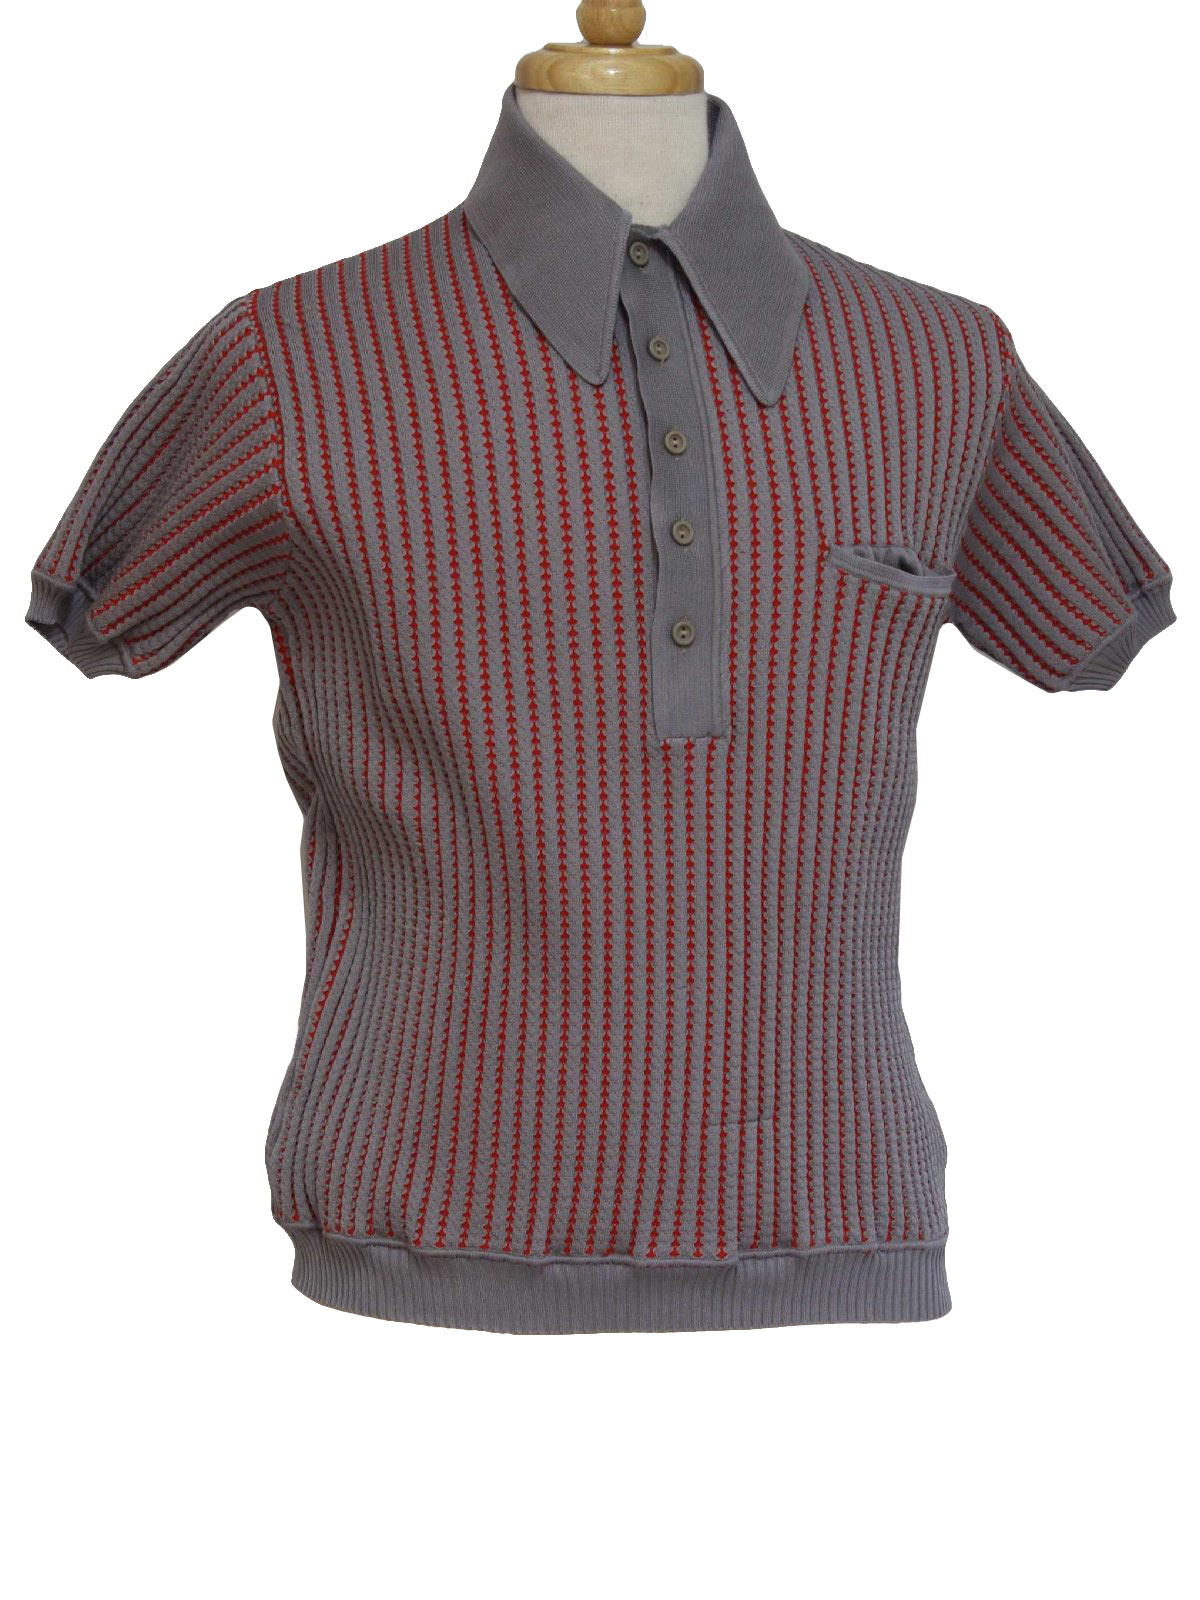 Retro 70's Knit Shirt: Early 70s -Damon- Mens grey and red textured rib ...